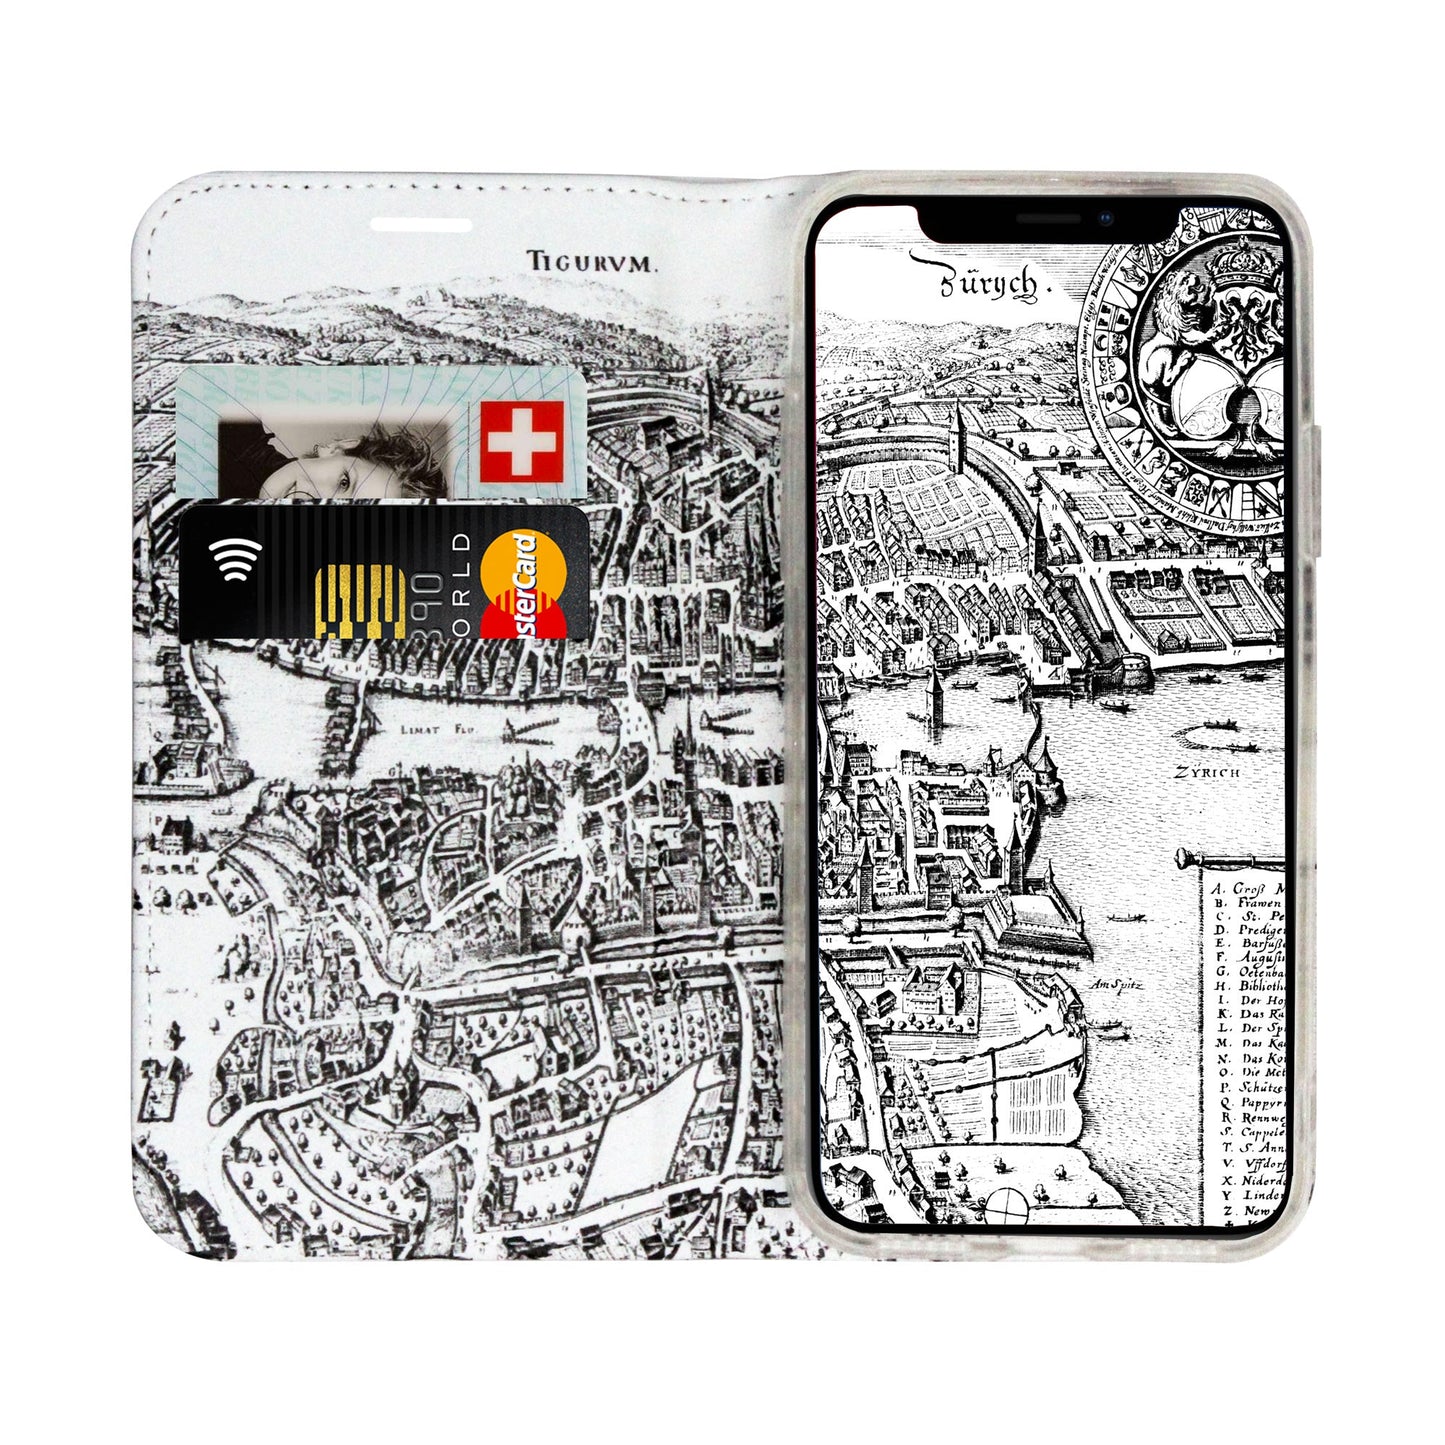 Zurich Merian Panorama Case for iPhone X/XS